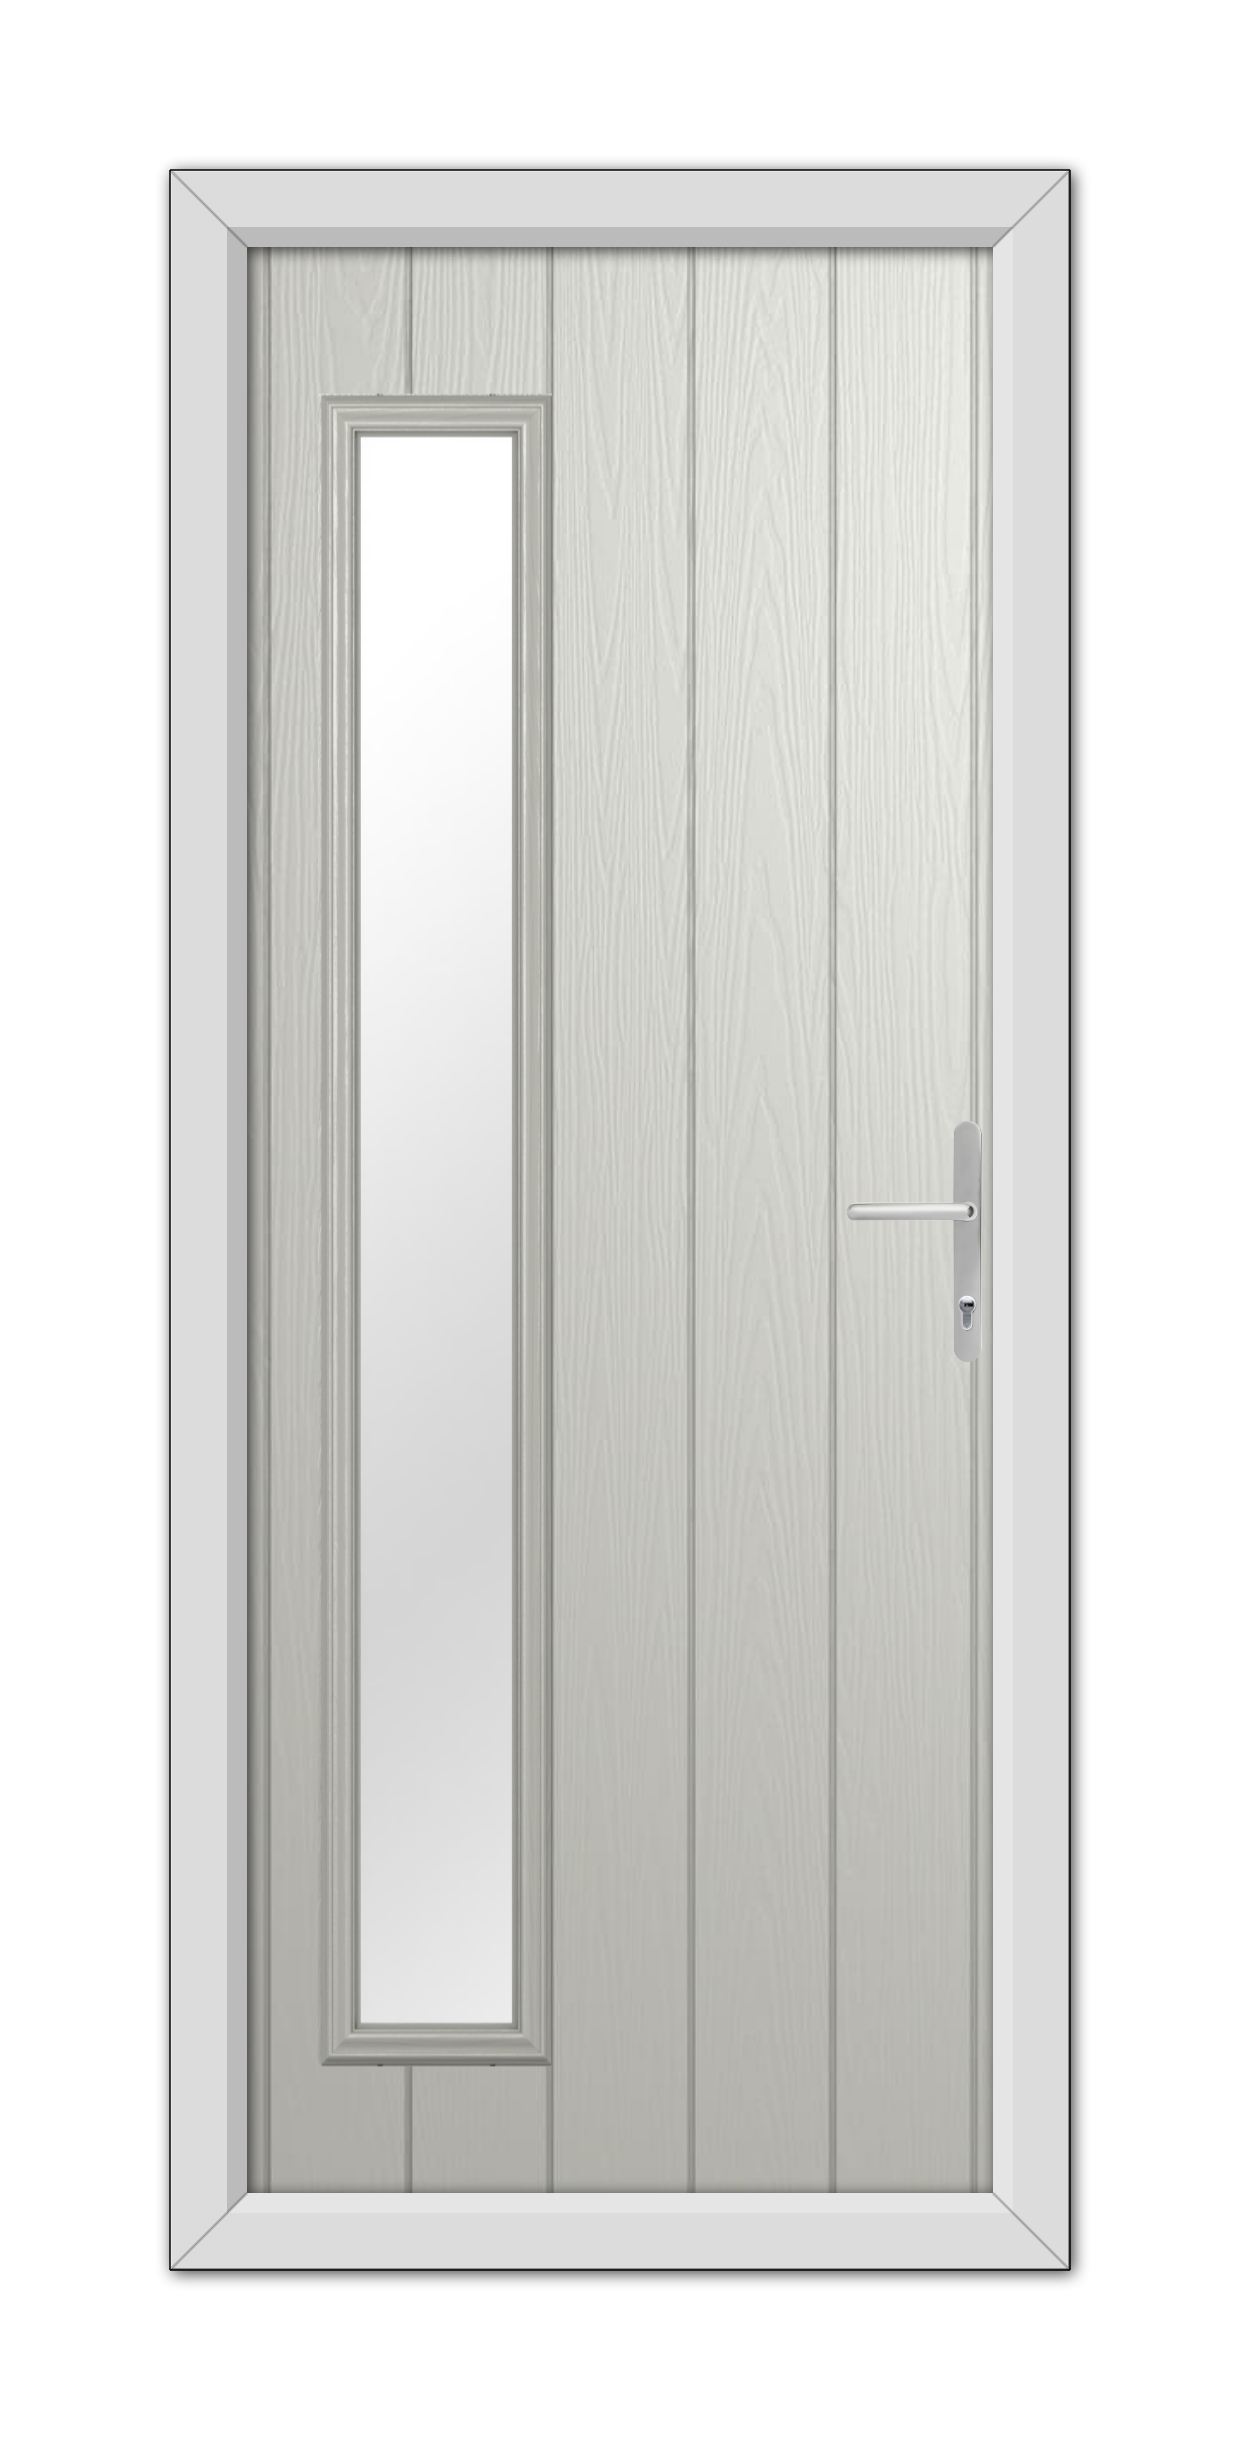 A Agate Grey Sutherland Composite Door 48mm Timber Core featuring a vertical, rectangular glass panel positioned towards the left and a metallic handle on the right.